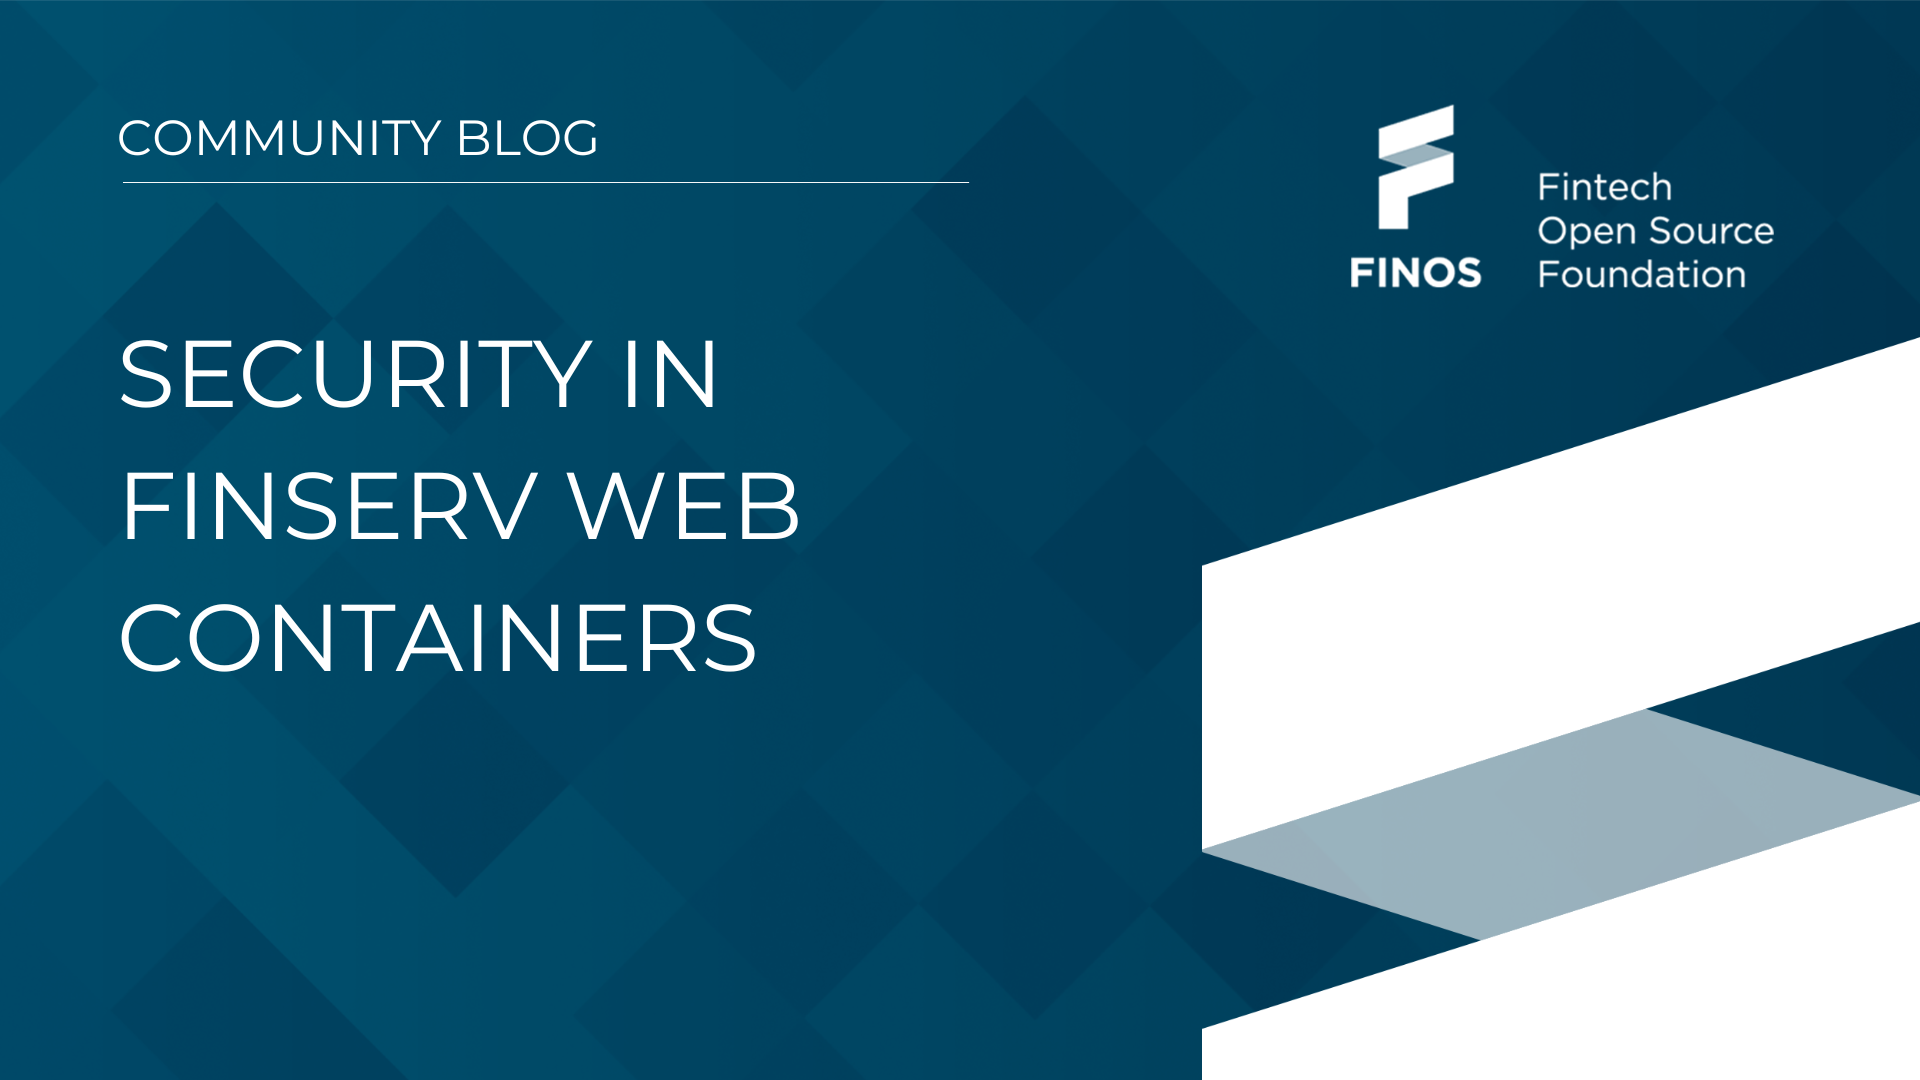 Security in Finserv Web Containers - Nick Kolba 7 June 2022